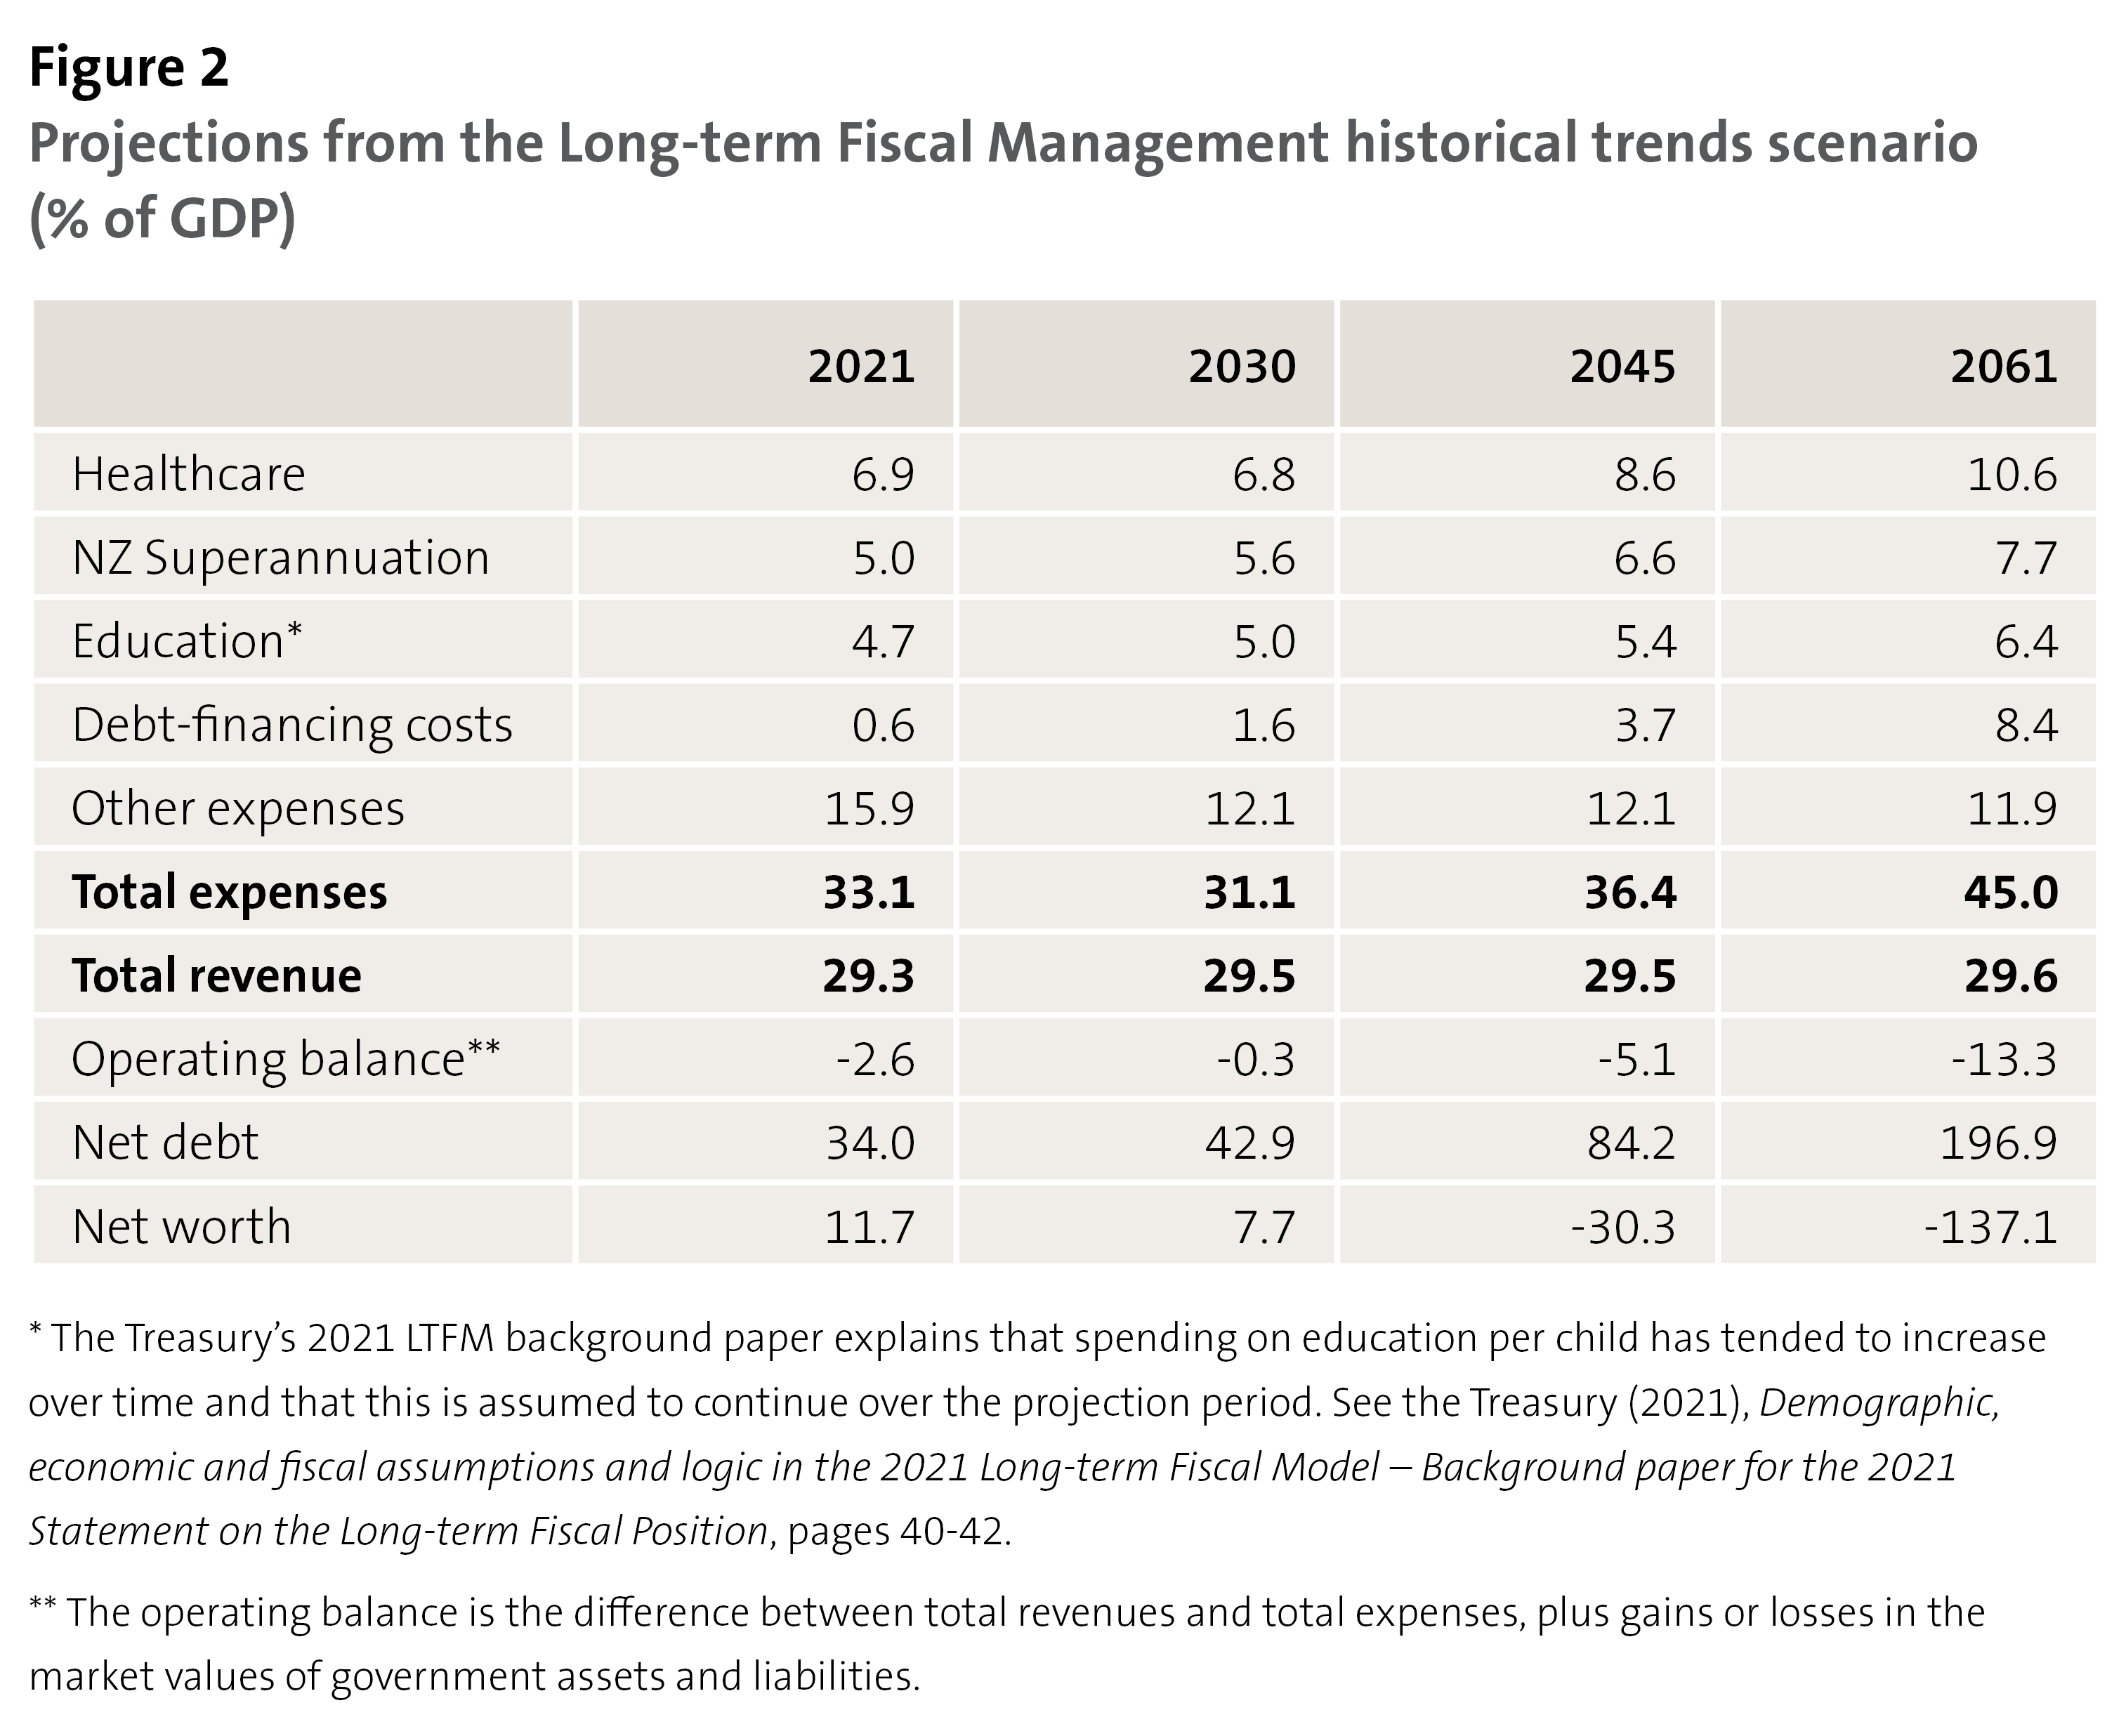 Figure 2: Projections from the Long-term Fiscal Management historical trends scenario (% of GDP)